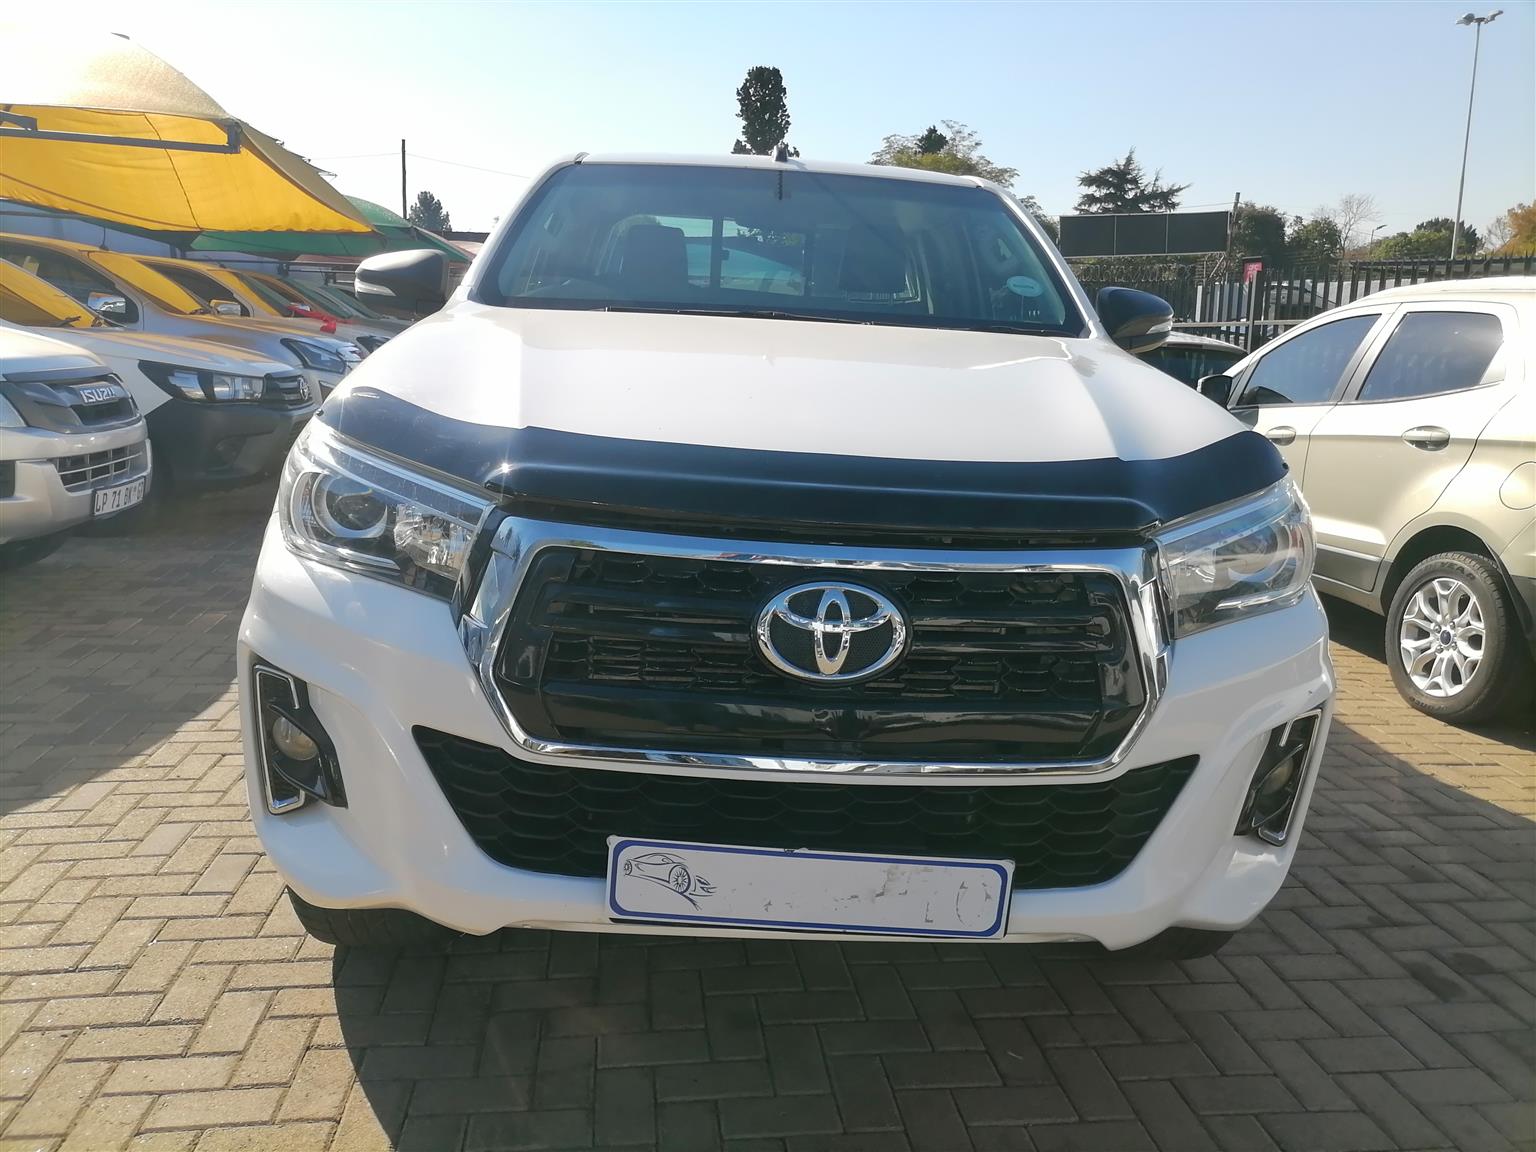 2017 Toyota Hilux 2.8GD-6 Xtra Cab Manual For Sale